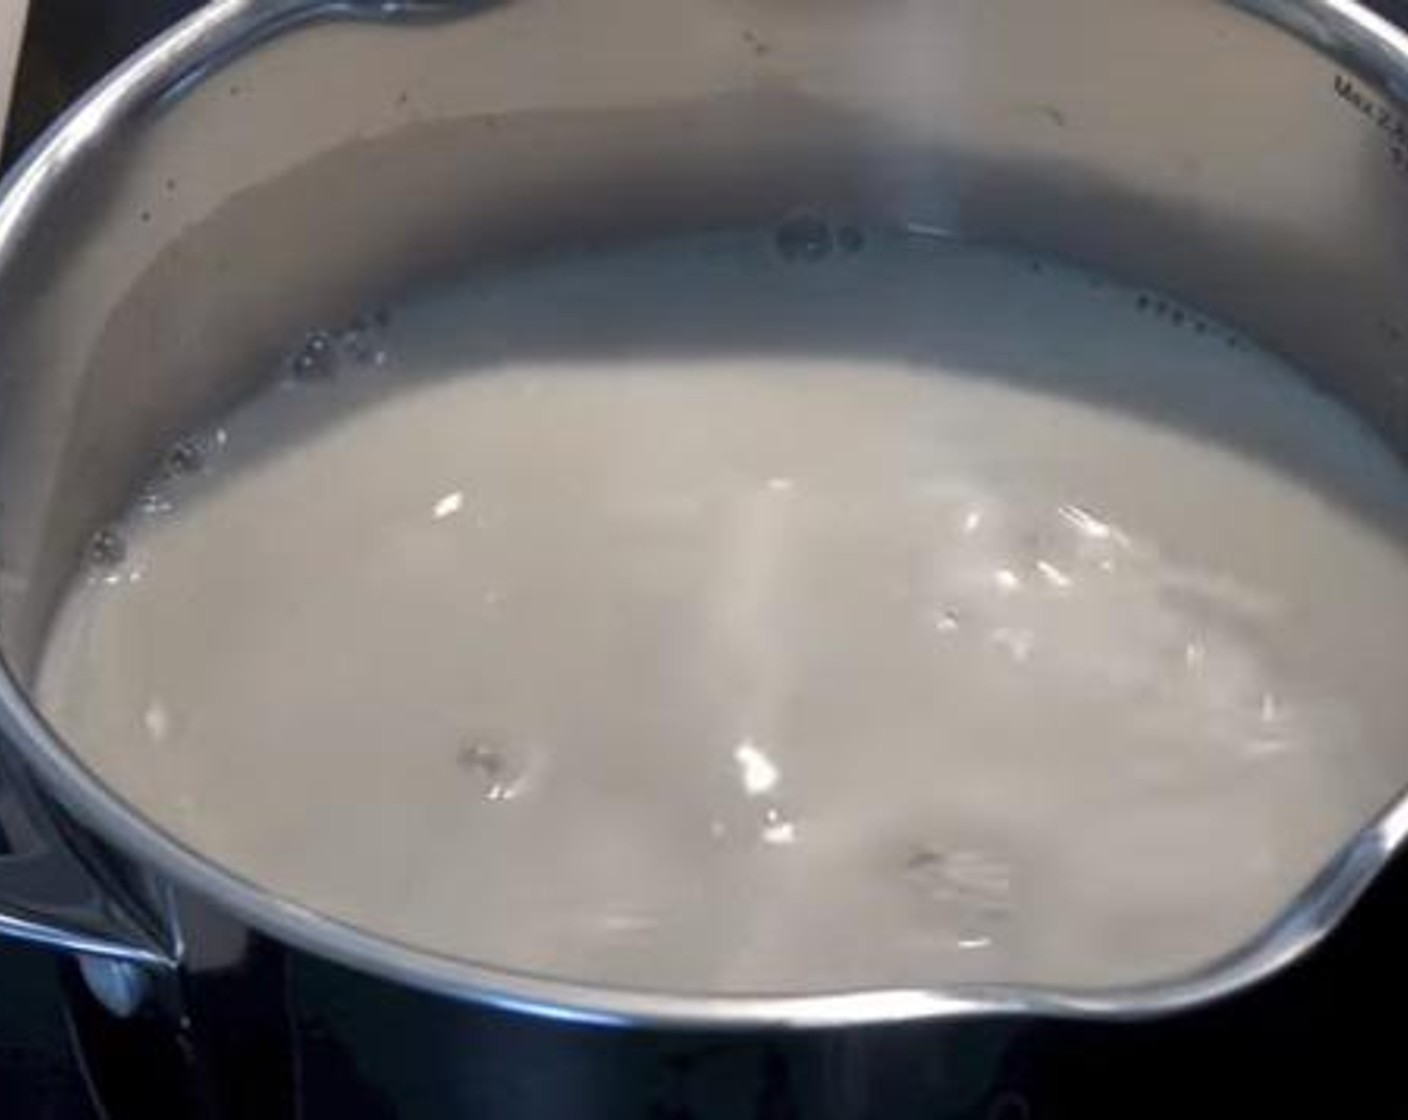 step 1 Into a pot over medium heat, add the Vegetable Stock (2 cups) and Milk (1/2 cup). Mix together and wait until the mixture simmers.